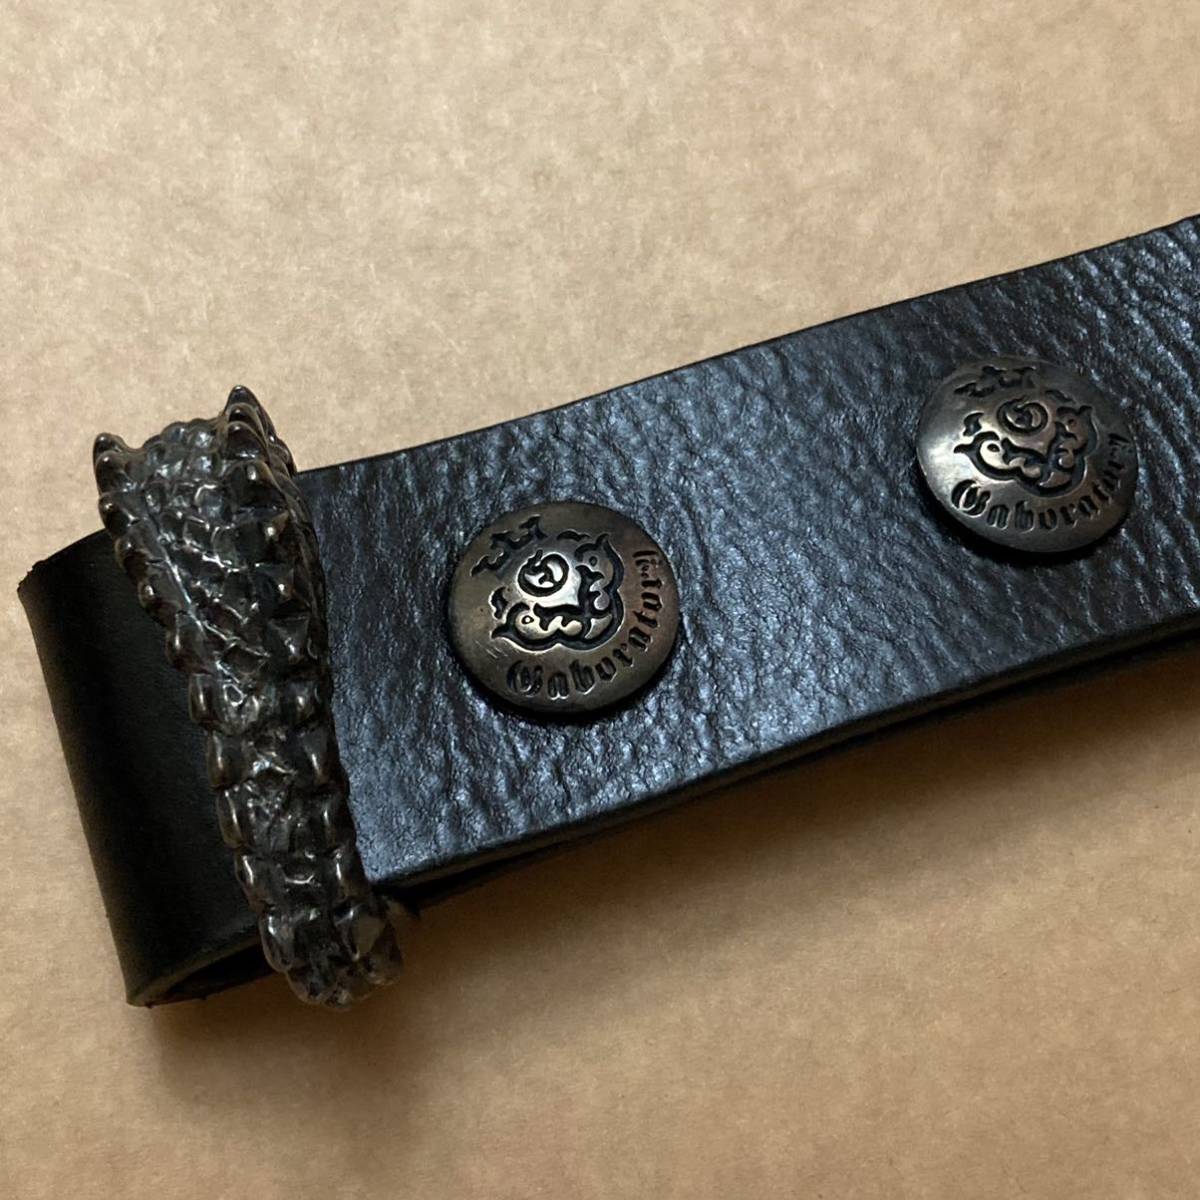 SP item * one point thing * super-gorgeous version gabolato Lee gaboratory Gabor Gabor Sune -k Skull face leather belt buckle .. silver Crown 